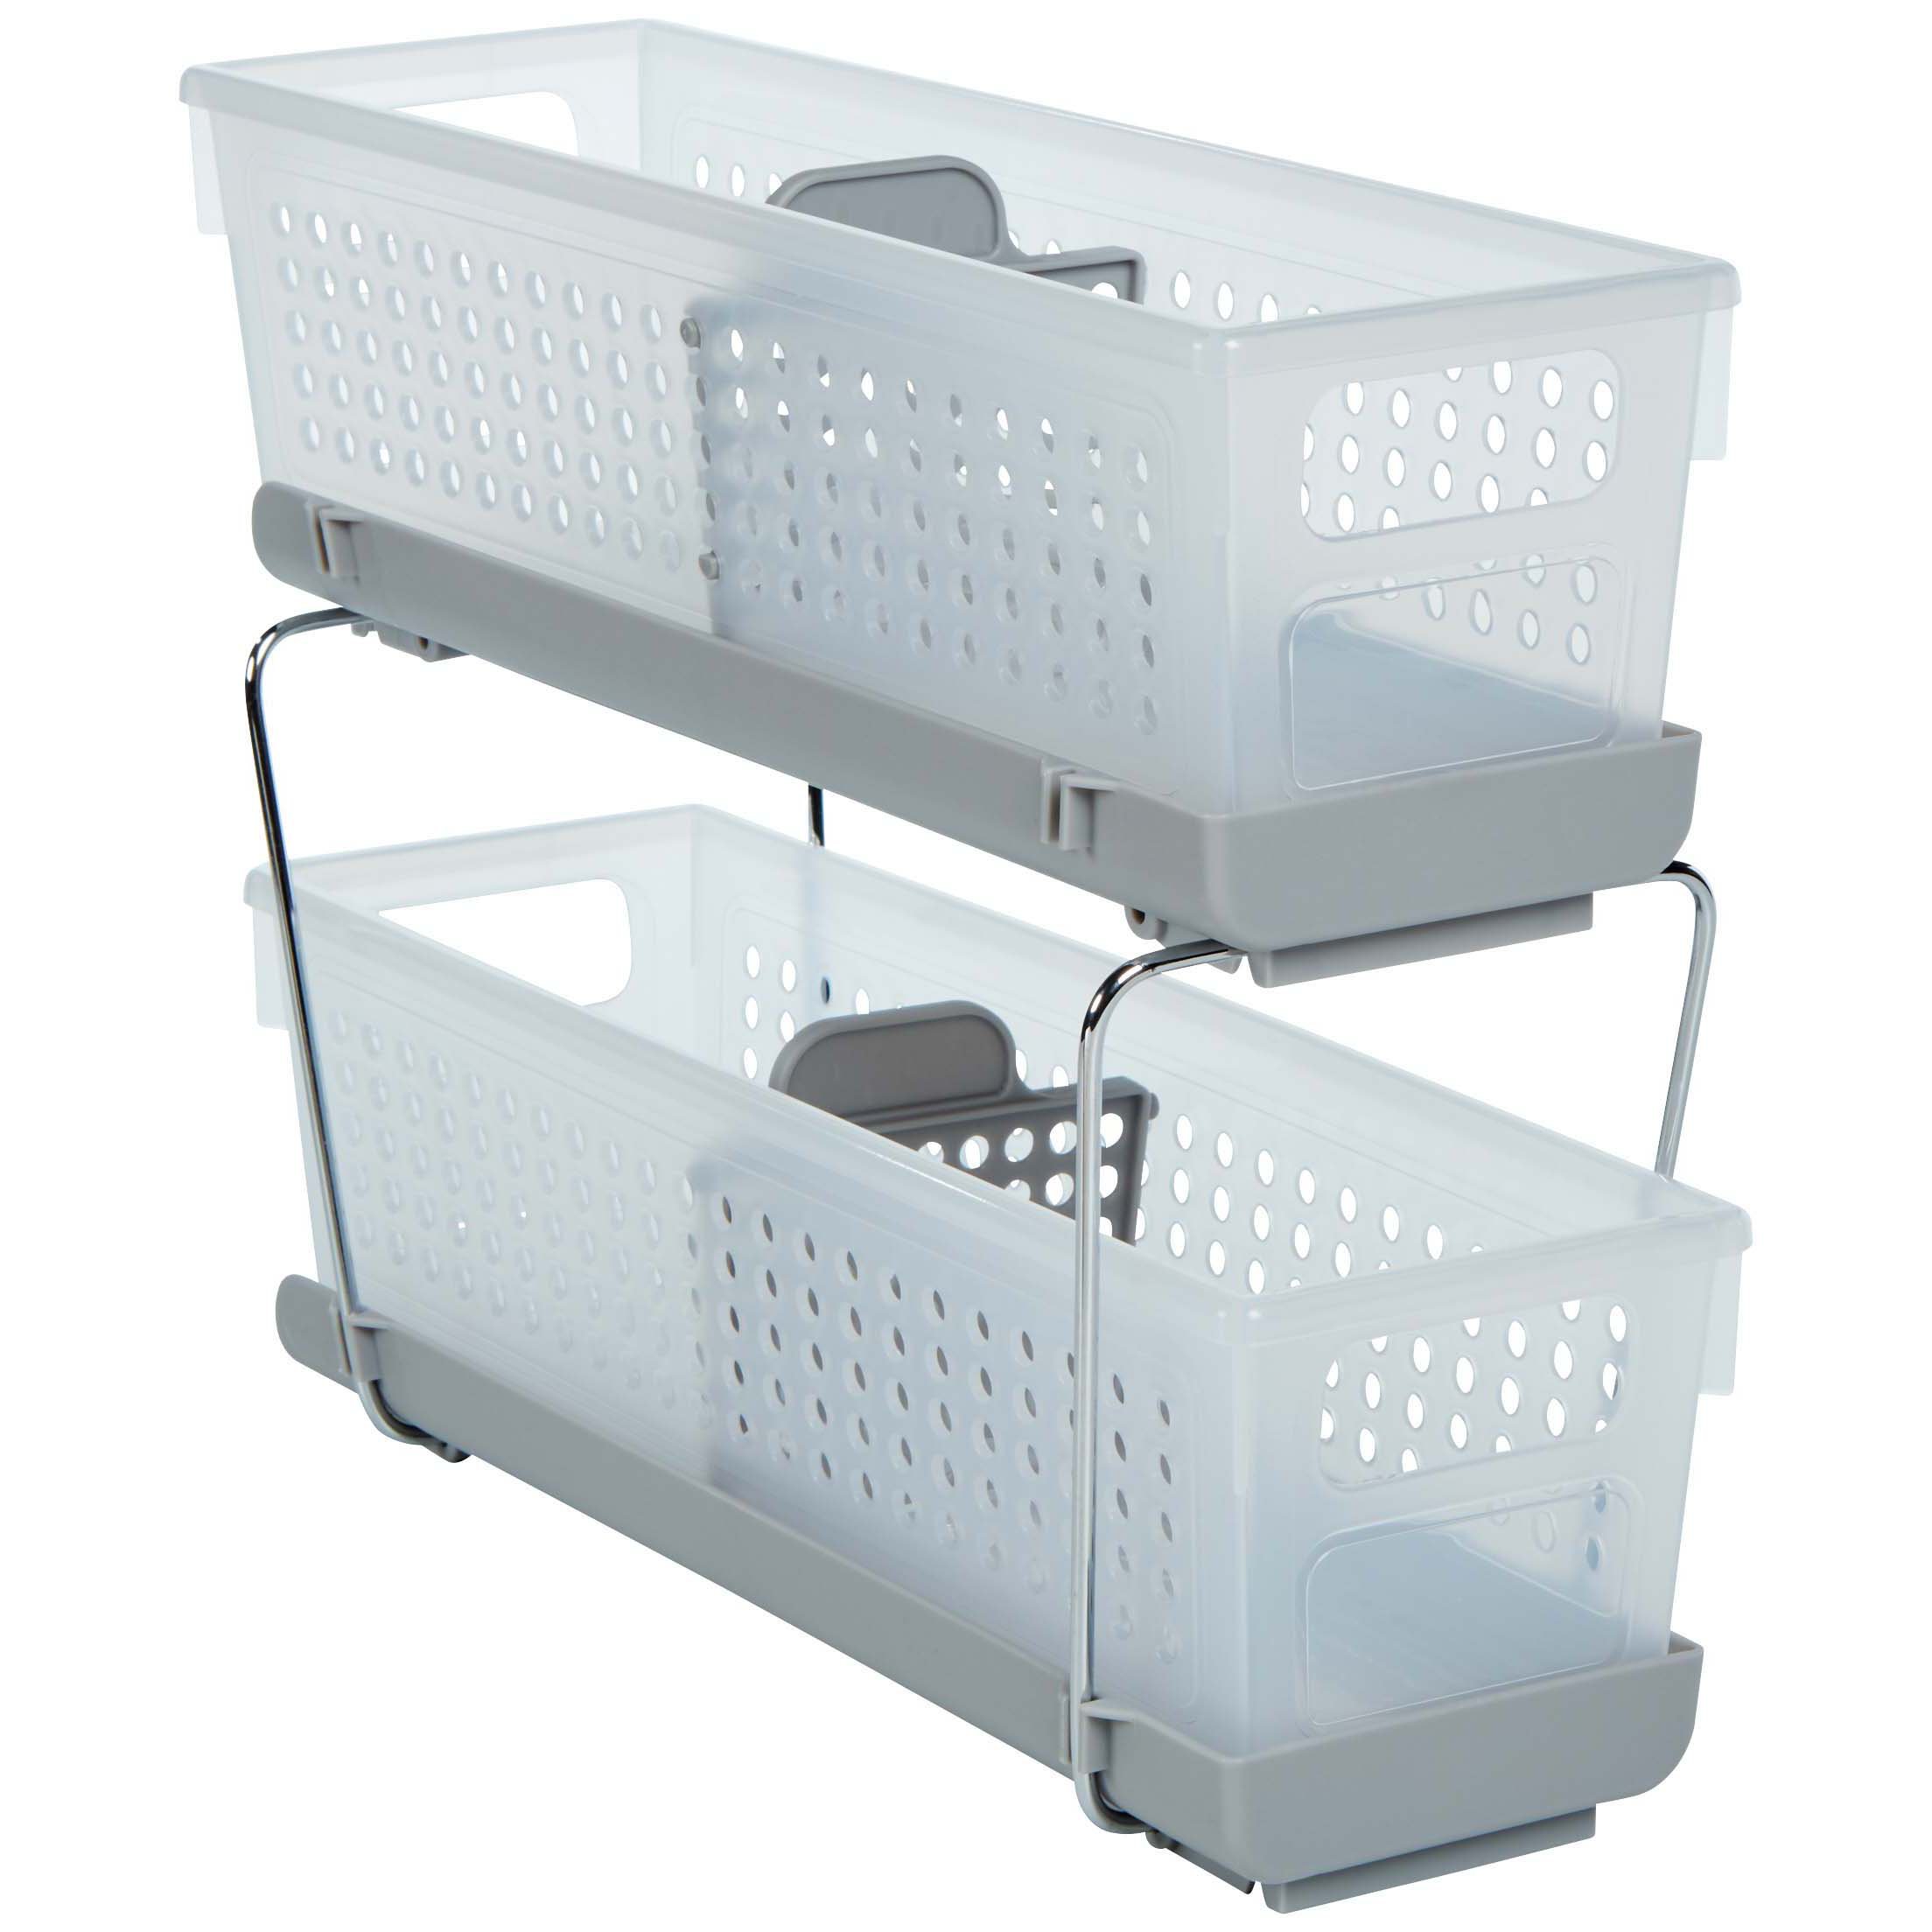 madesmart Mini 2-Tier Organizer with Dividers